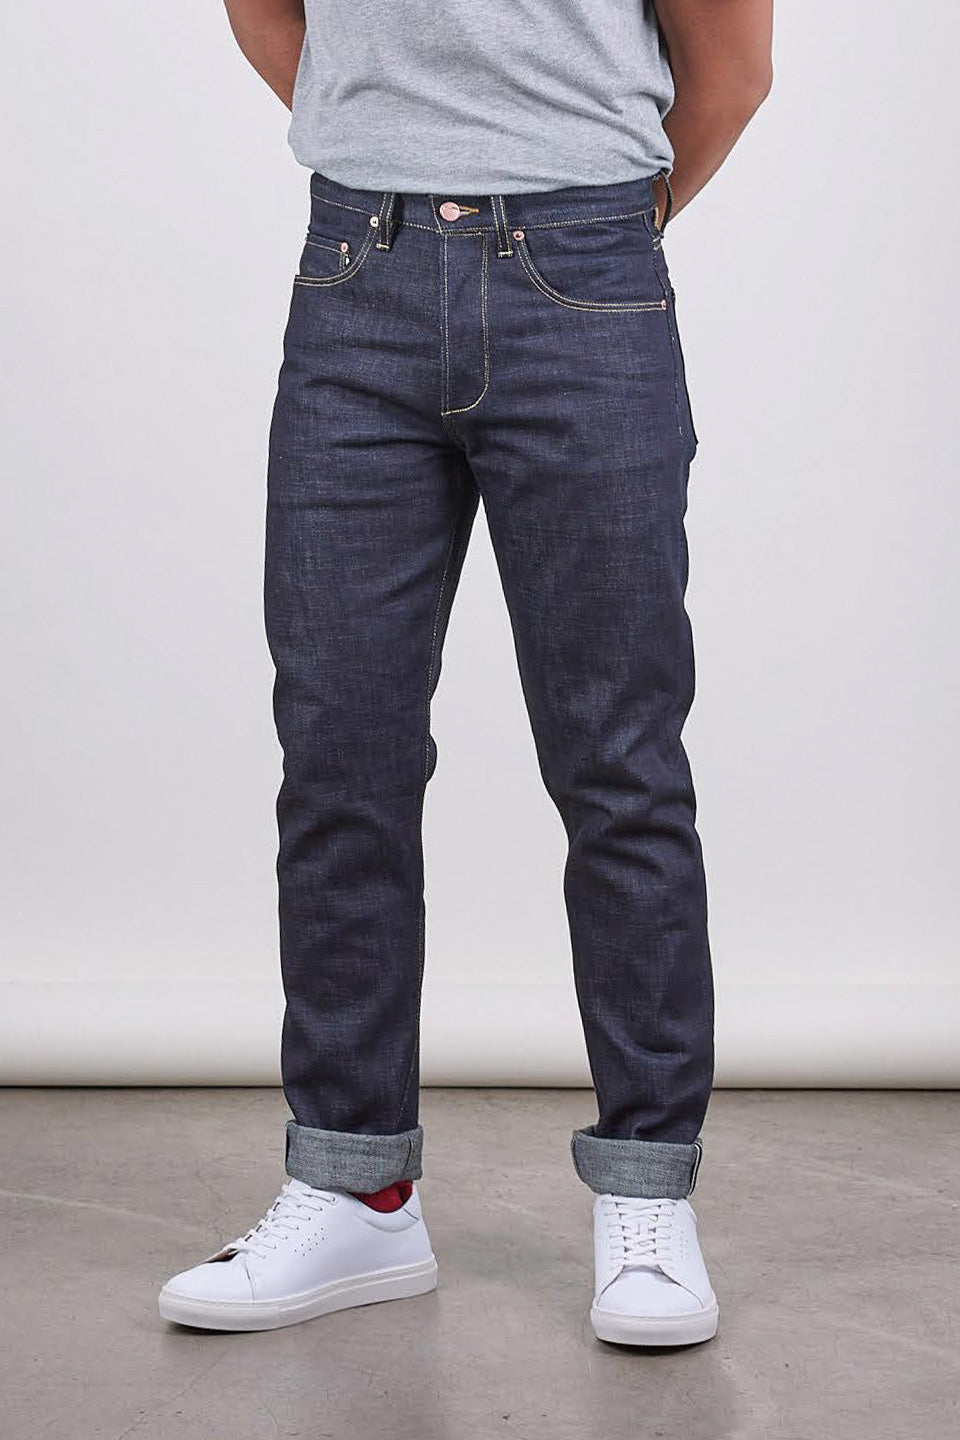 tapered mens